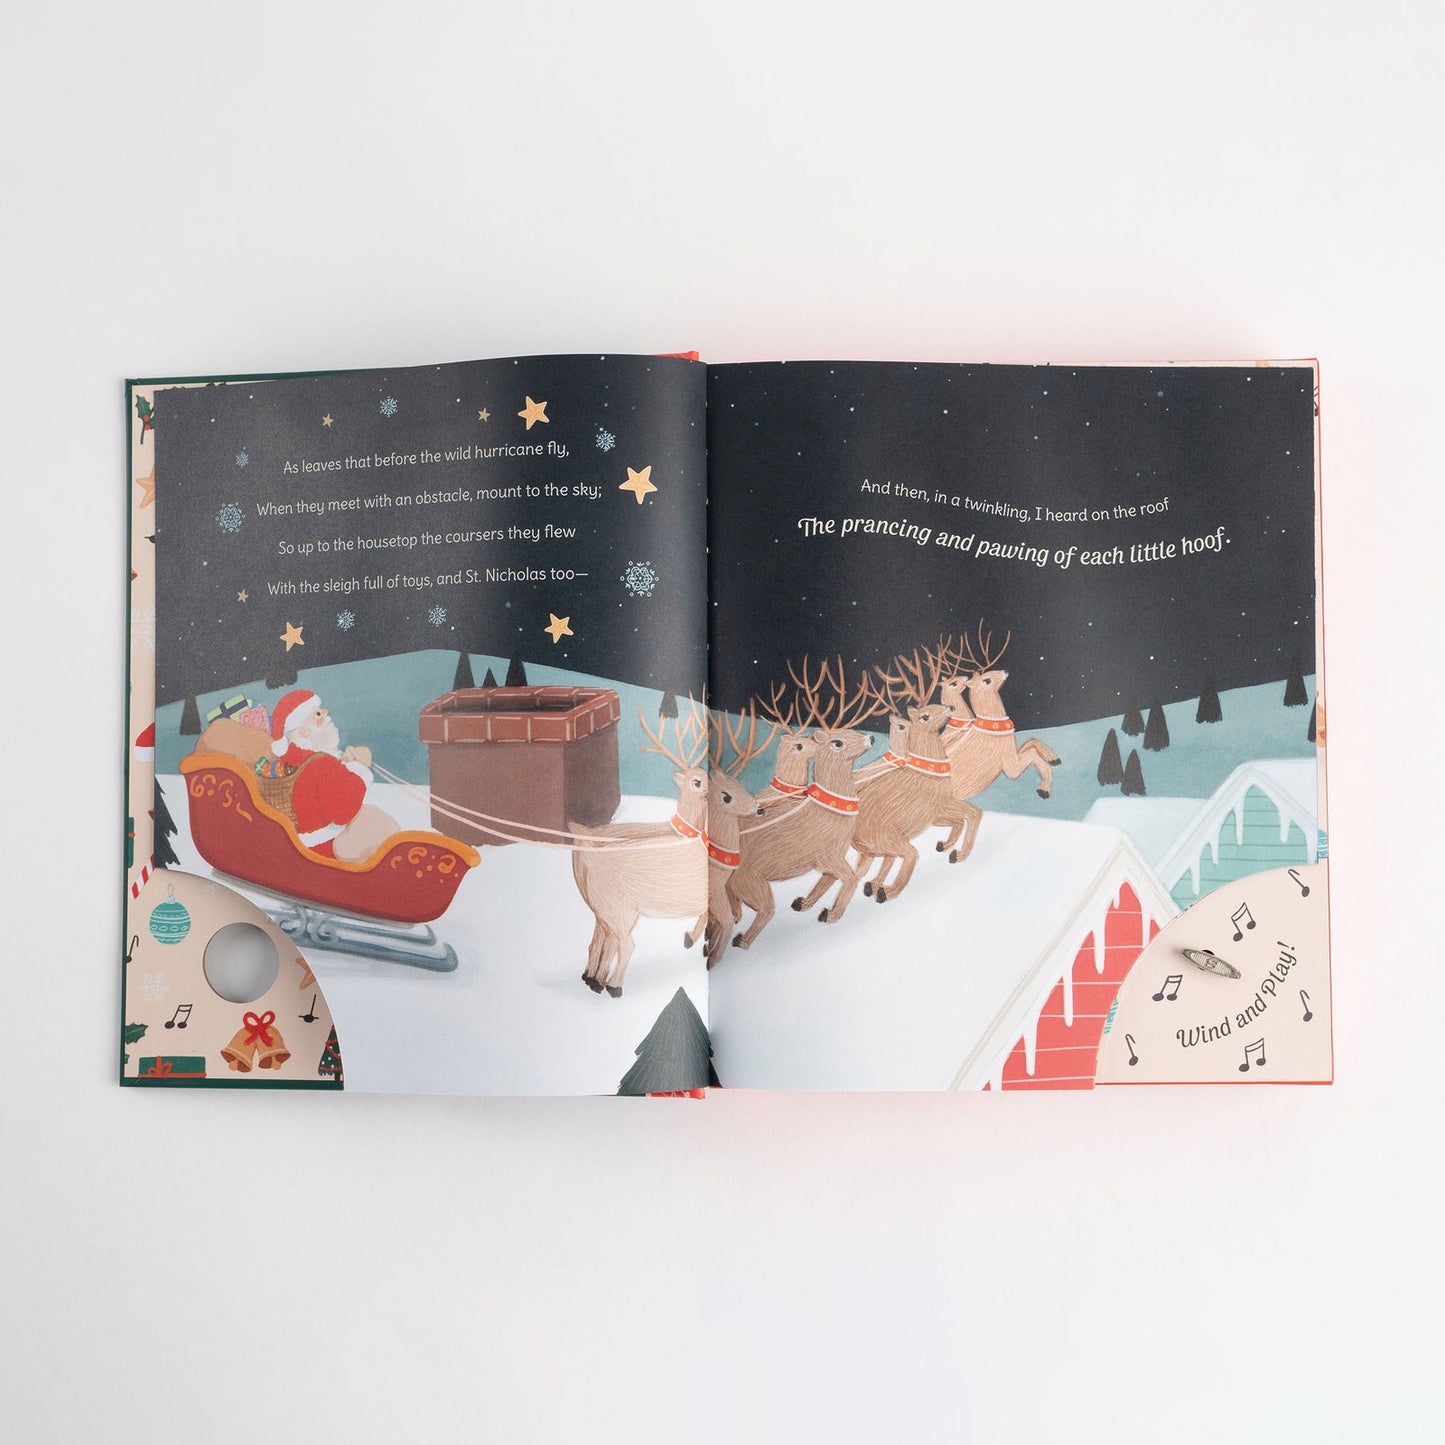 Abrams Books Stories from the Music Box - Twas the Night Before Christmas Book